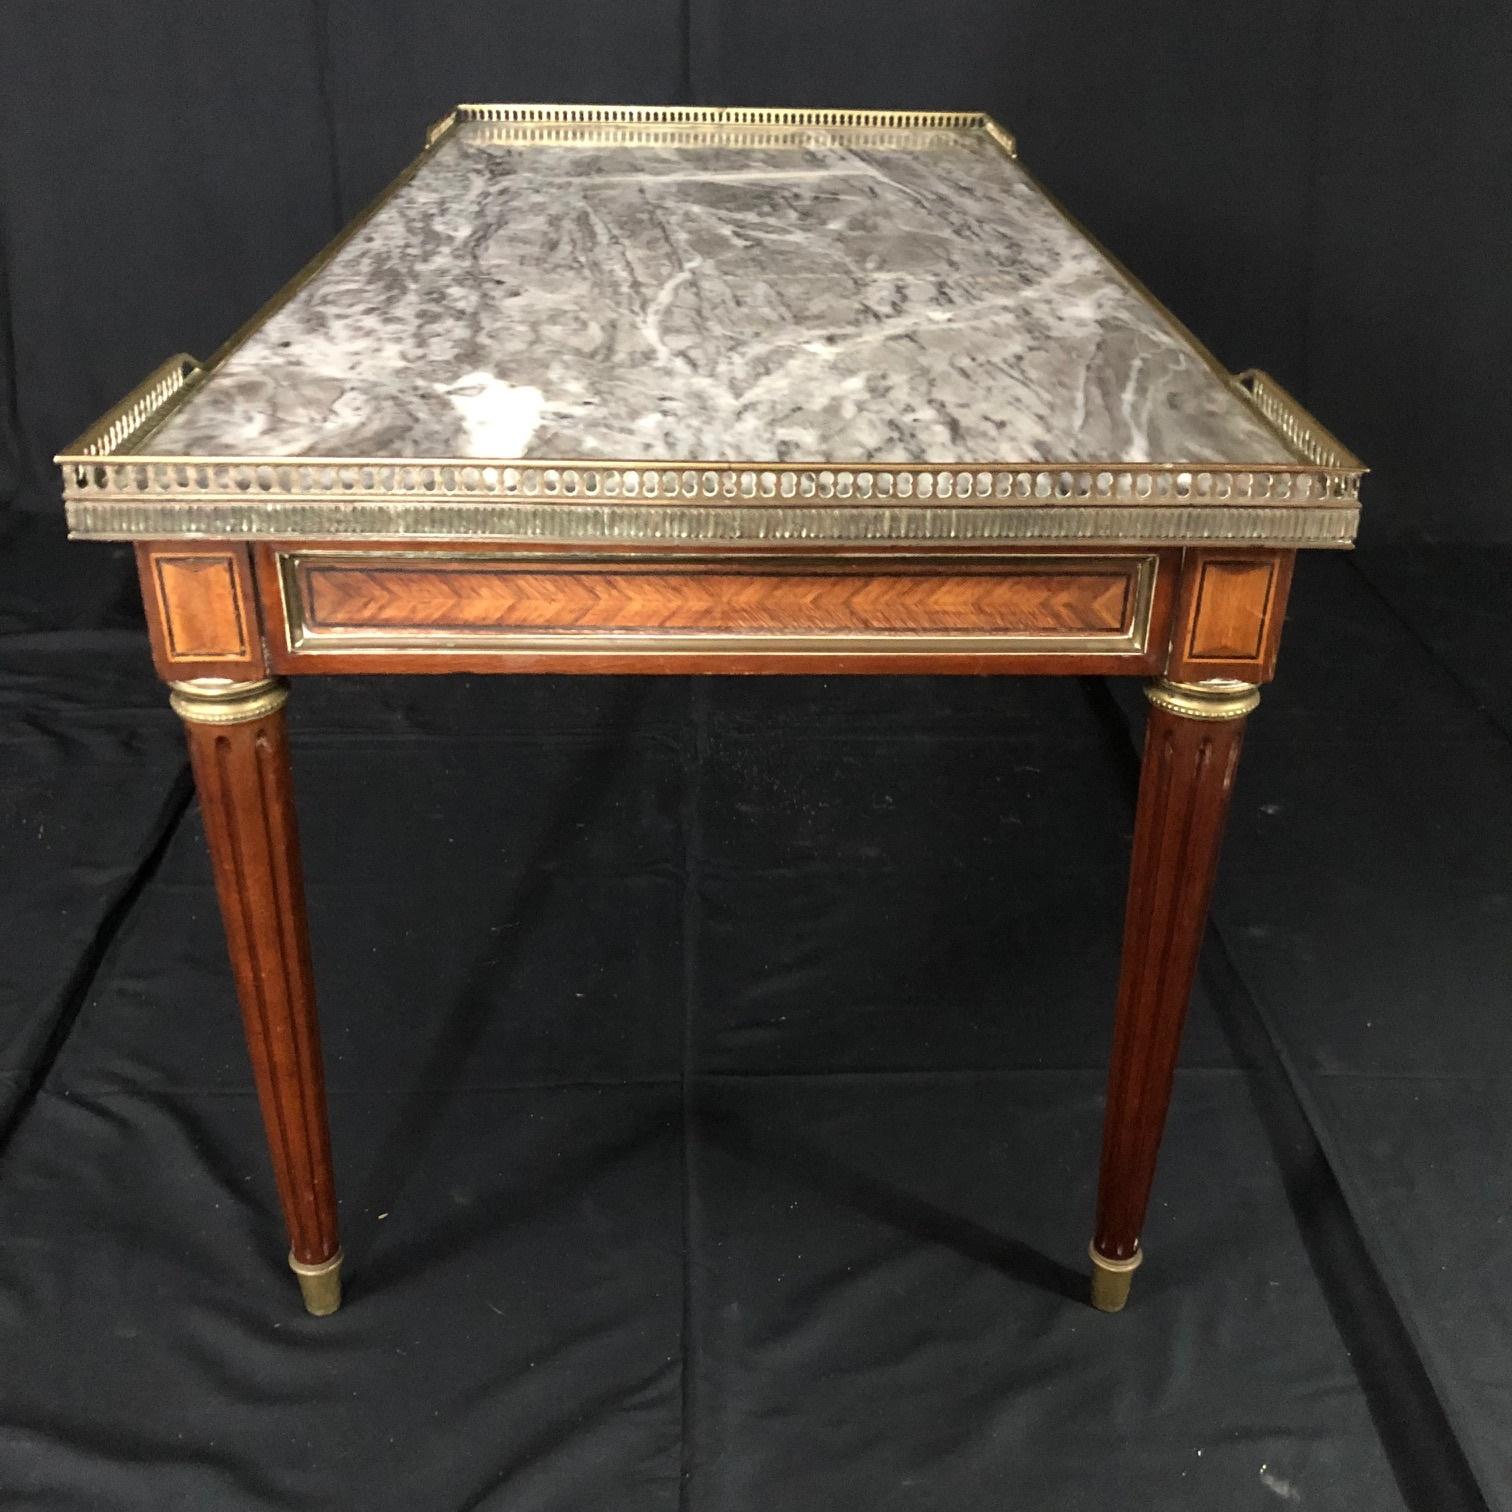 Classic Louis XVI style walnut coffee table with beautiful marble top and gold brass fretwork gallery. Great size and rich grey and white marble top. Marble has a professionally repaired crack (see photos) that is well camouflaged with the graining.